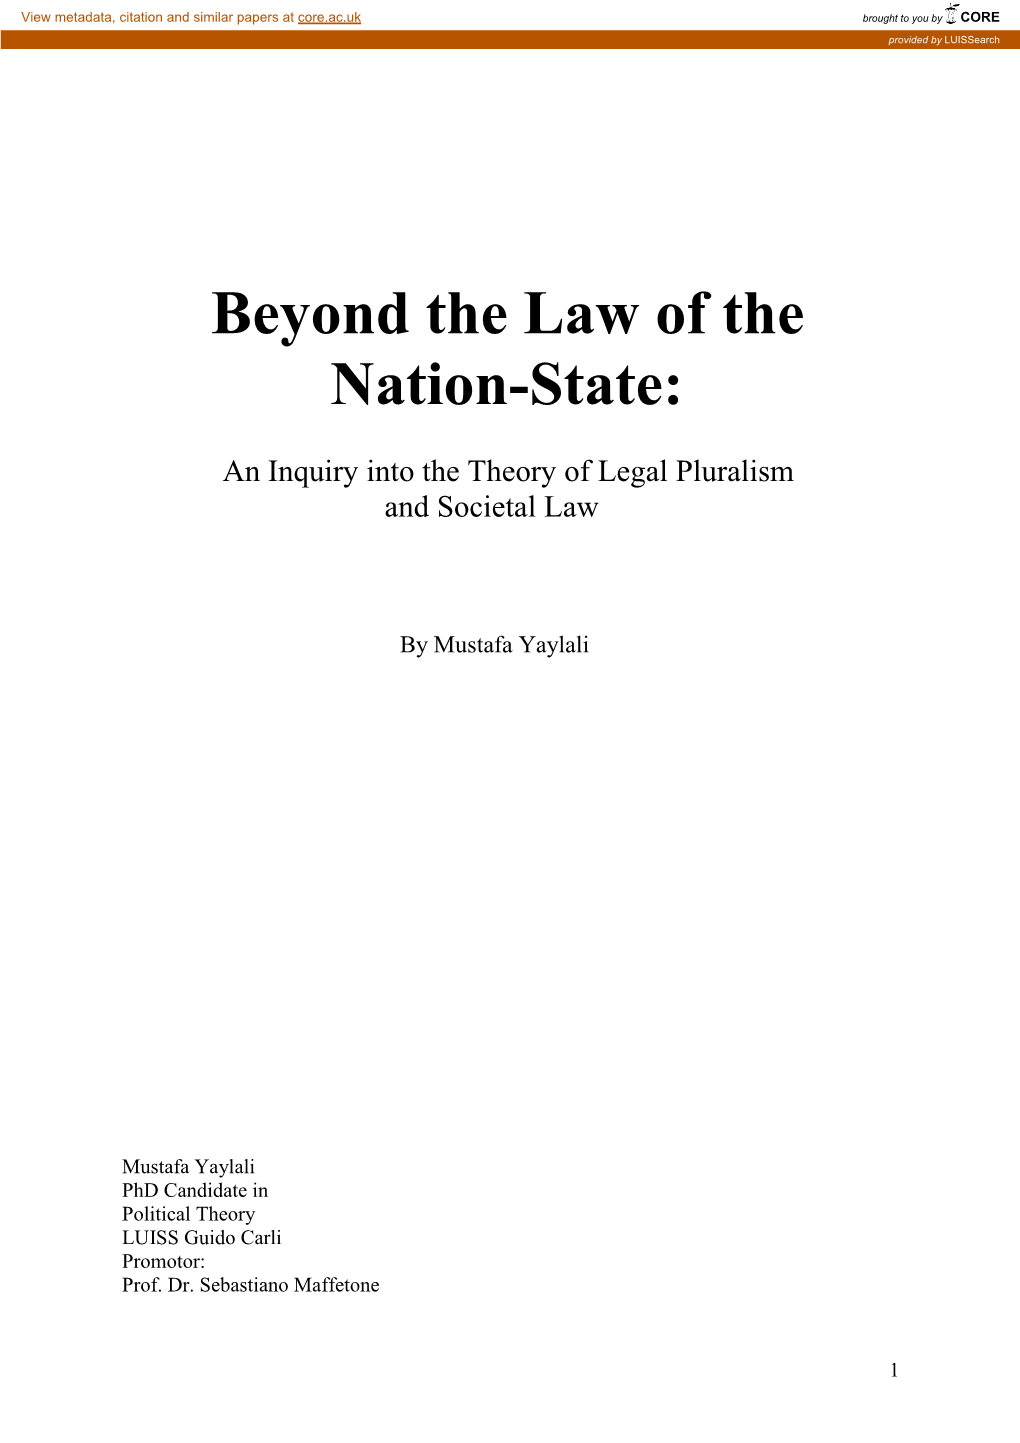 Beyond the Law of the Nation-State